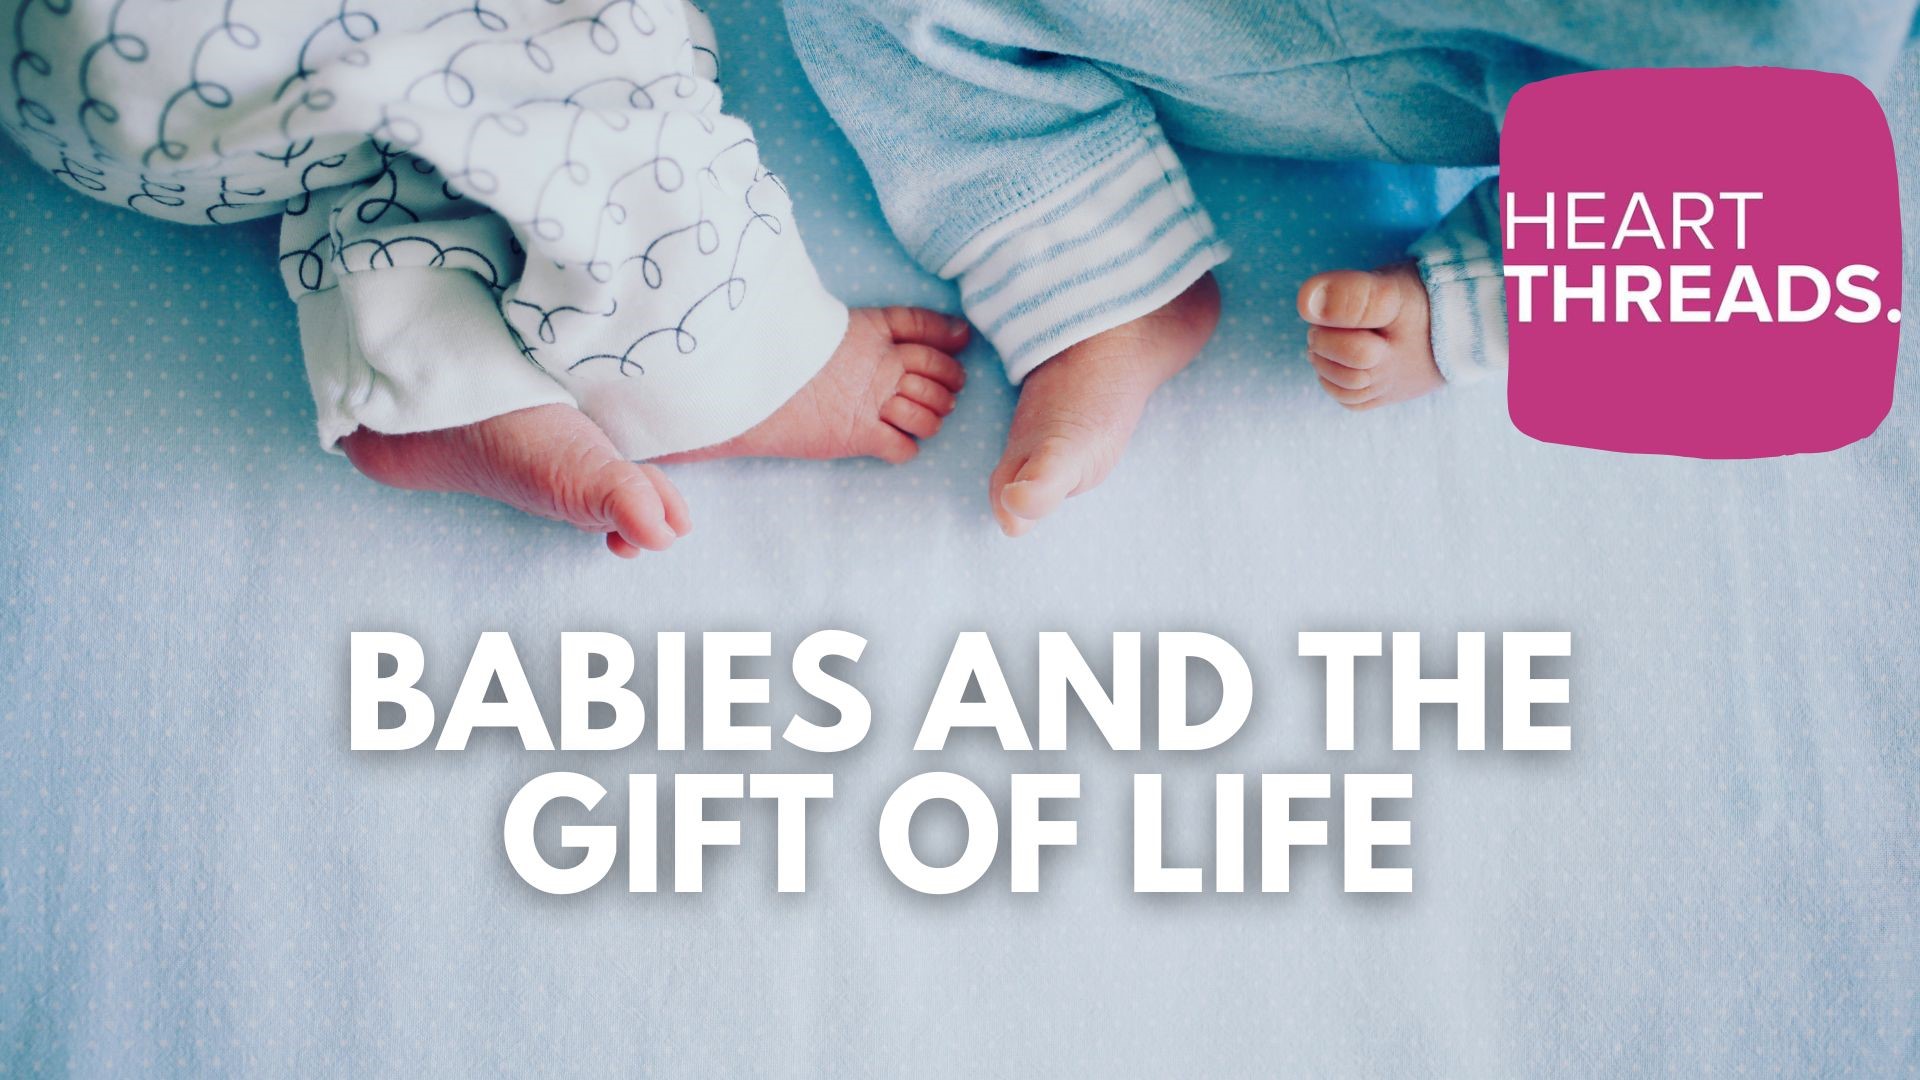 Heartwarming stories celebrating the gift of life and babies, as well as those who help bring them into the world.